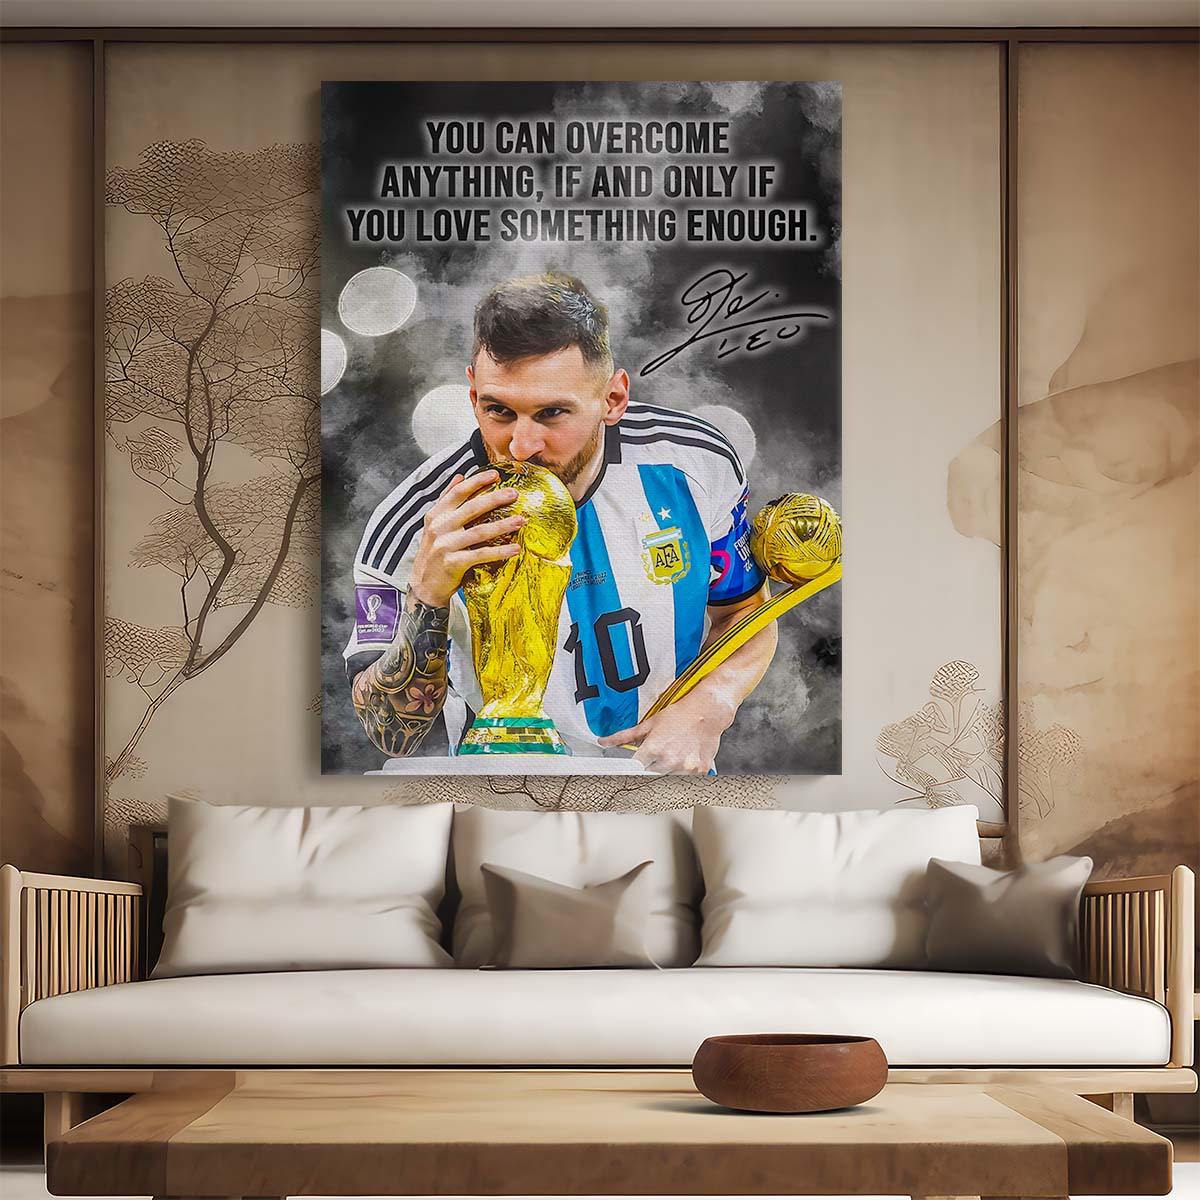 Leo Messi World Cup Overcome Anything Wall Art by Luxuriance Designs. Made in USA.